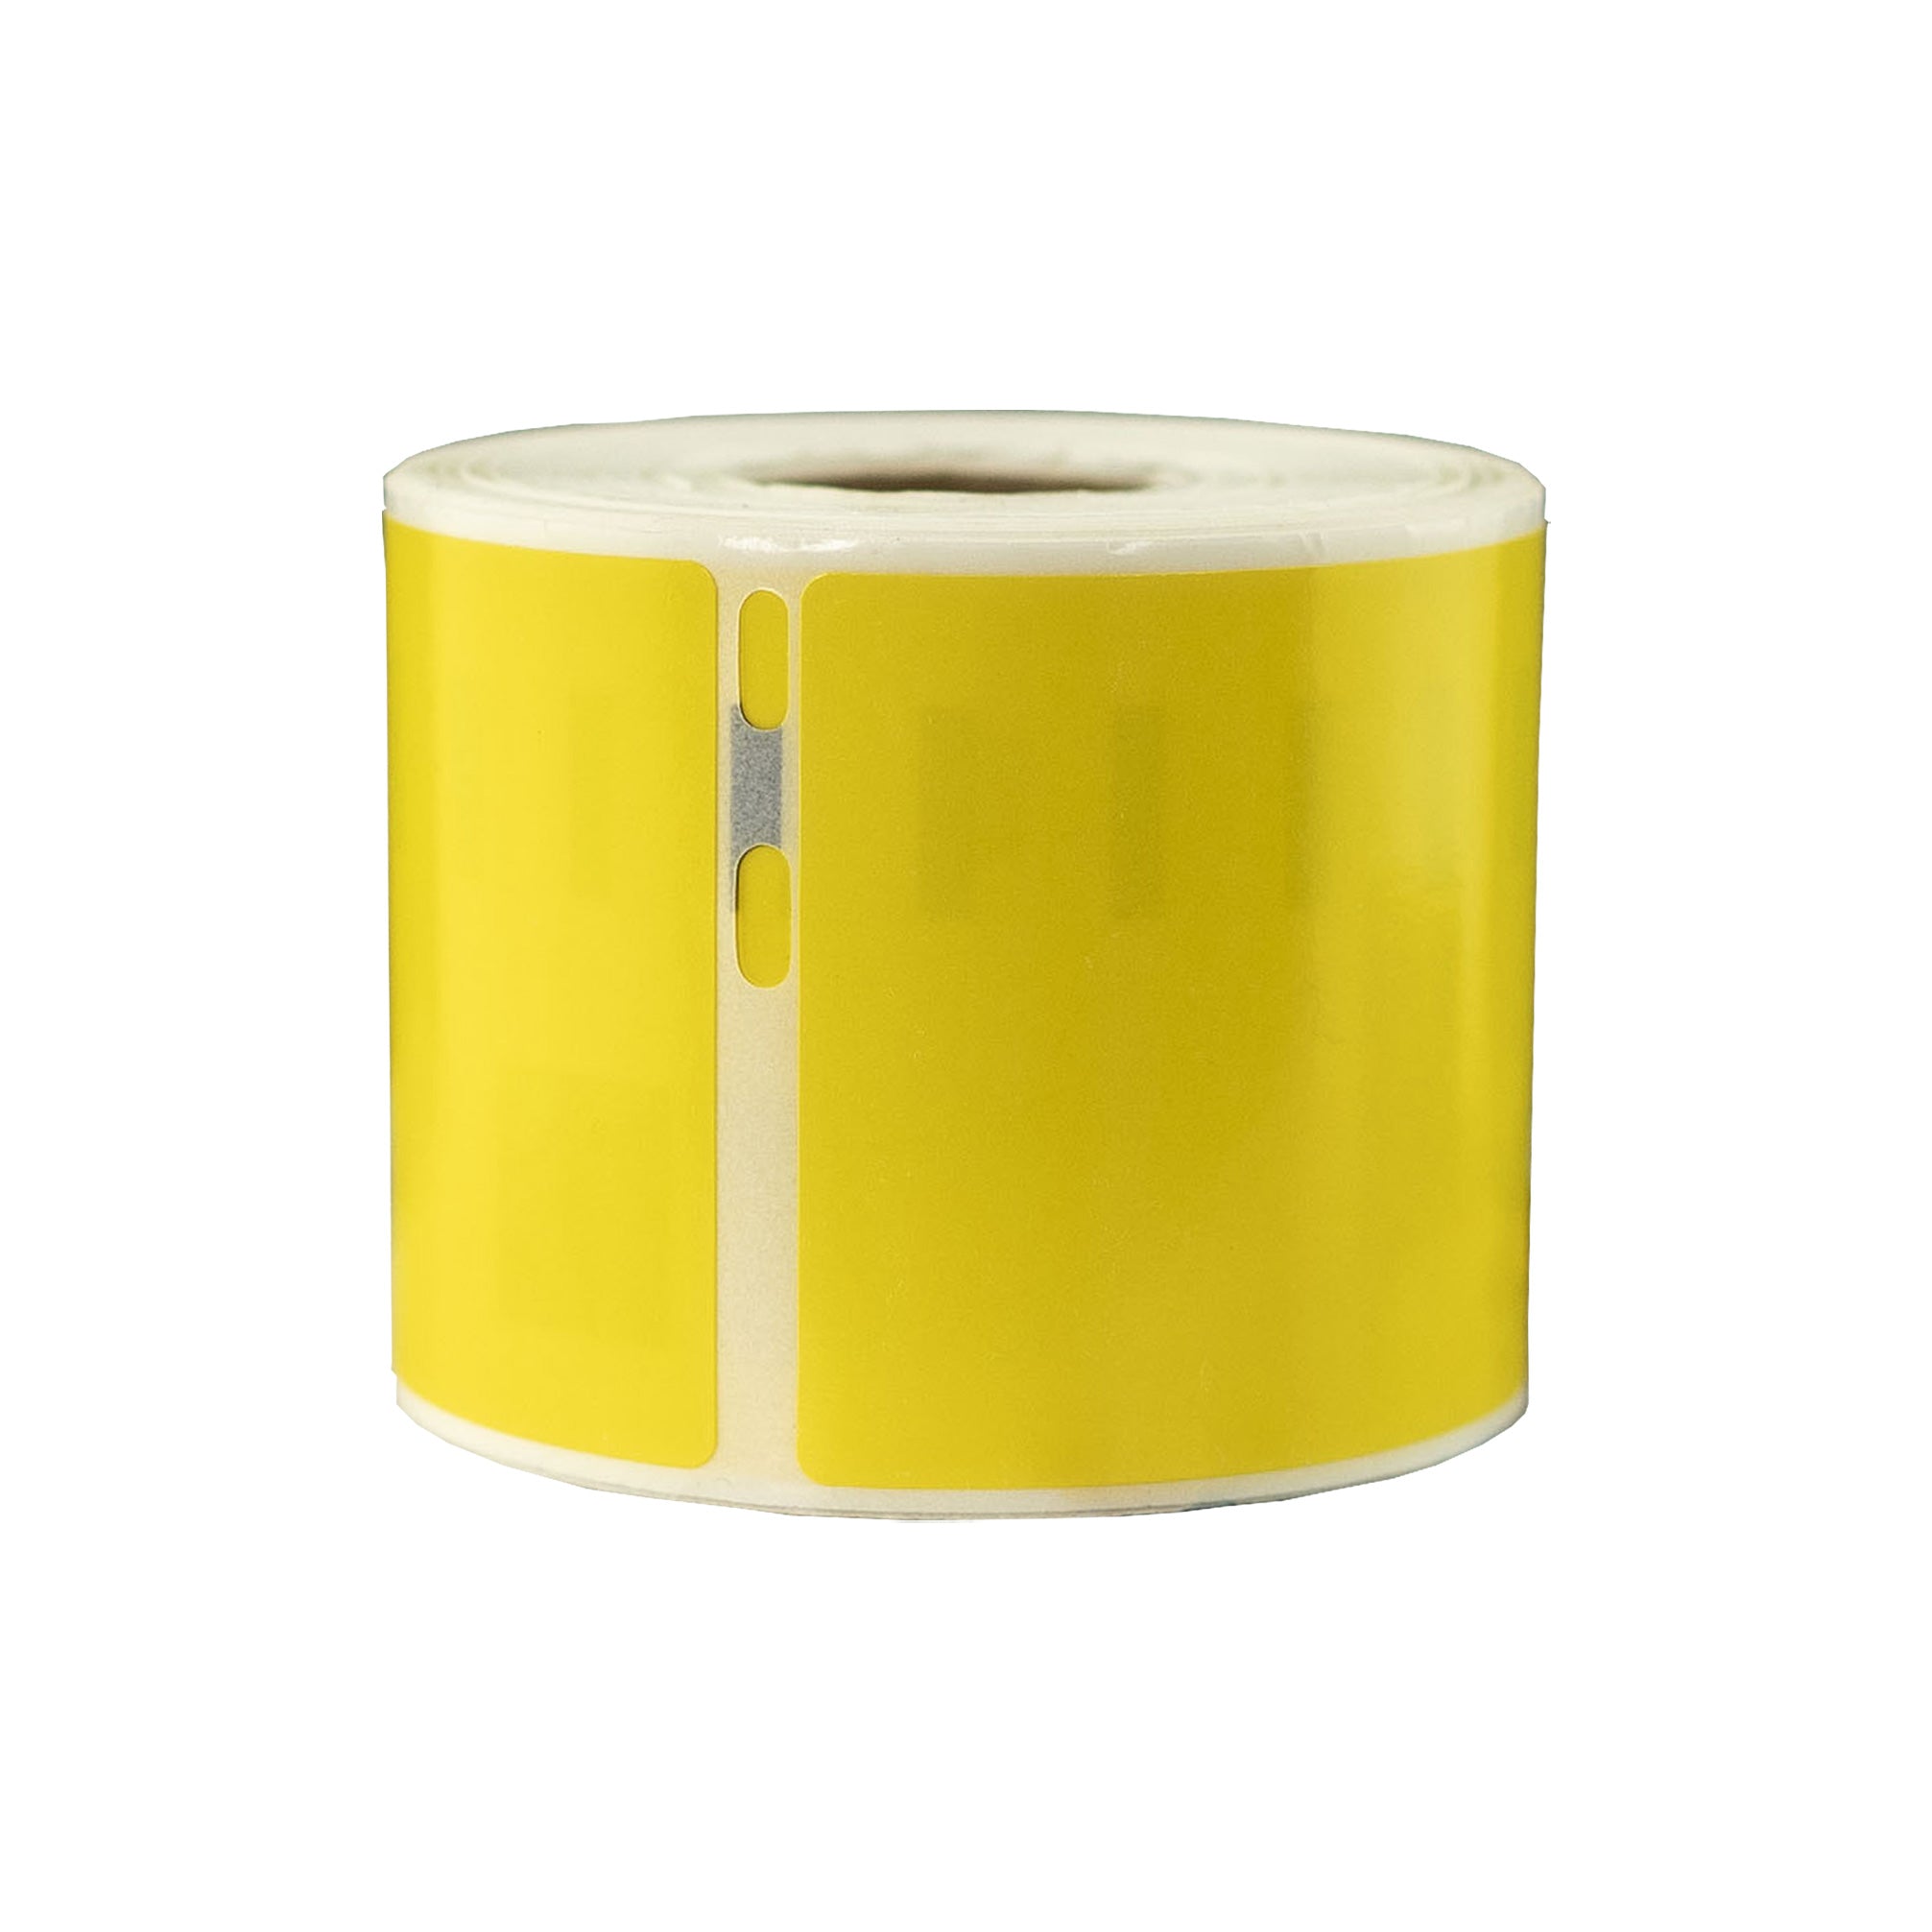 Compatible Dymo 99014 Yellow Shipping Labels 54 x 101mm/ 50 Rolls